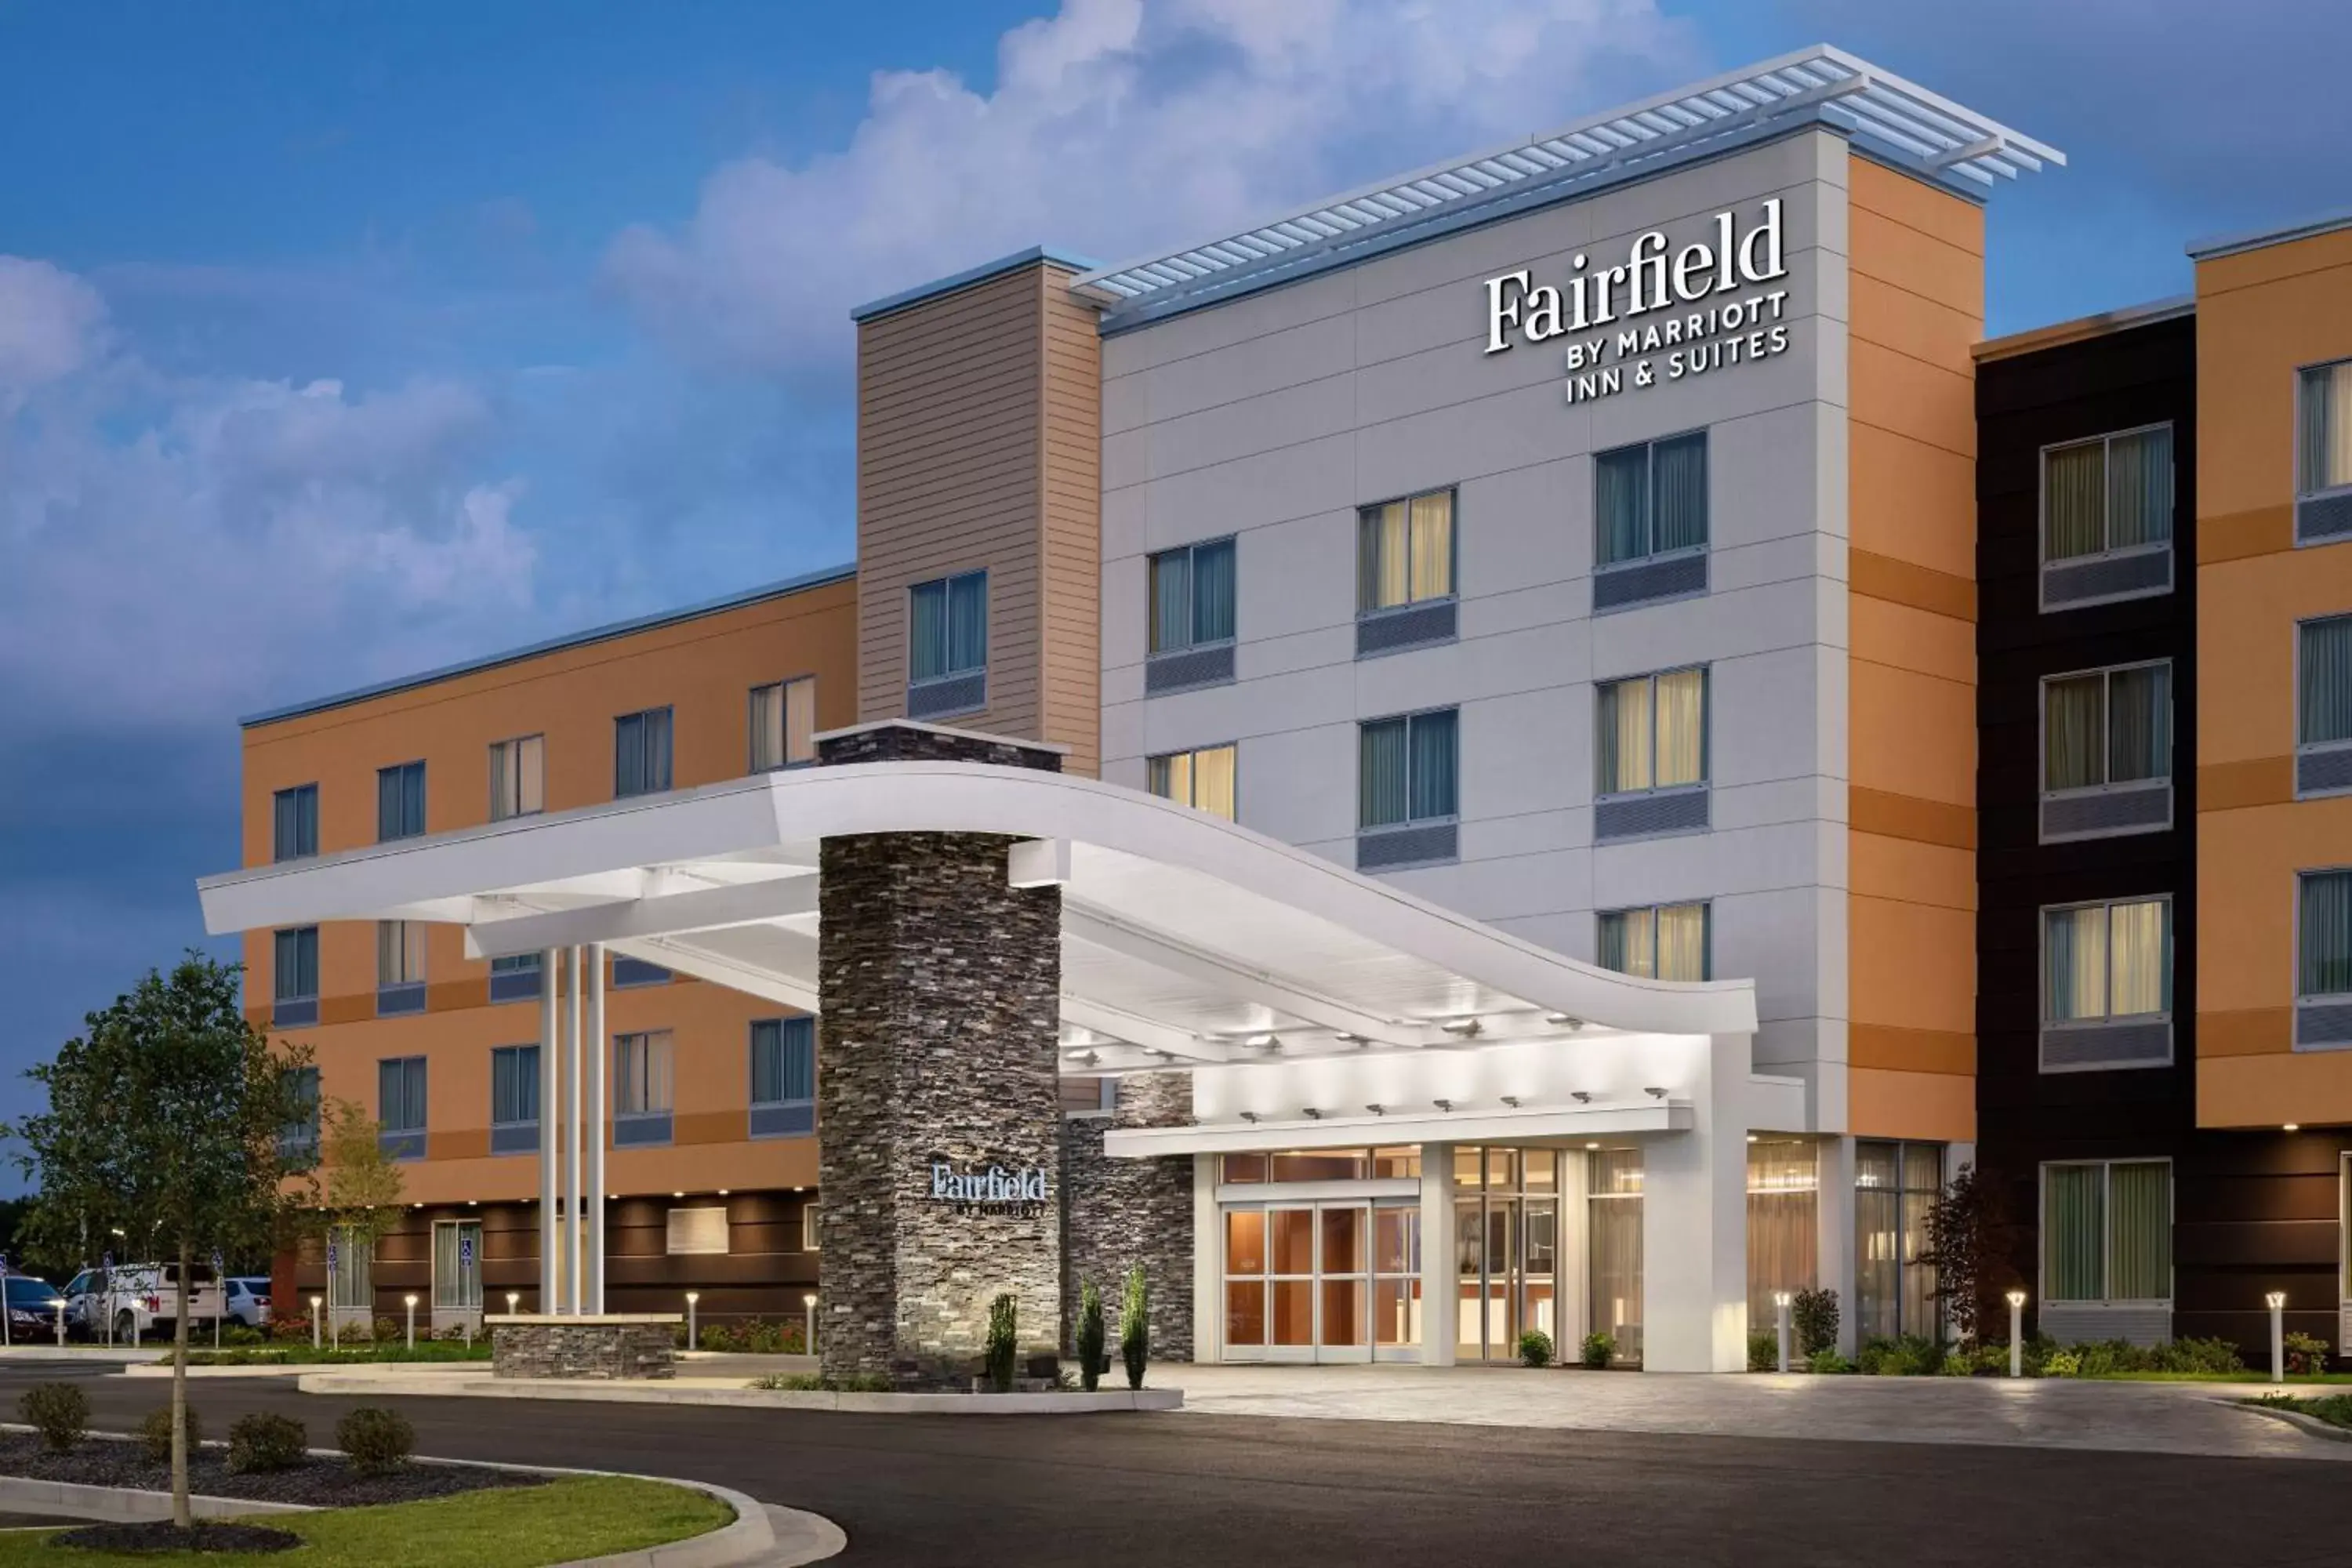 Property Building in Fairfield by Marriott Inn & Suites Dallas DFW Airport North, Irving